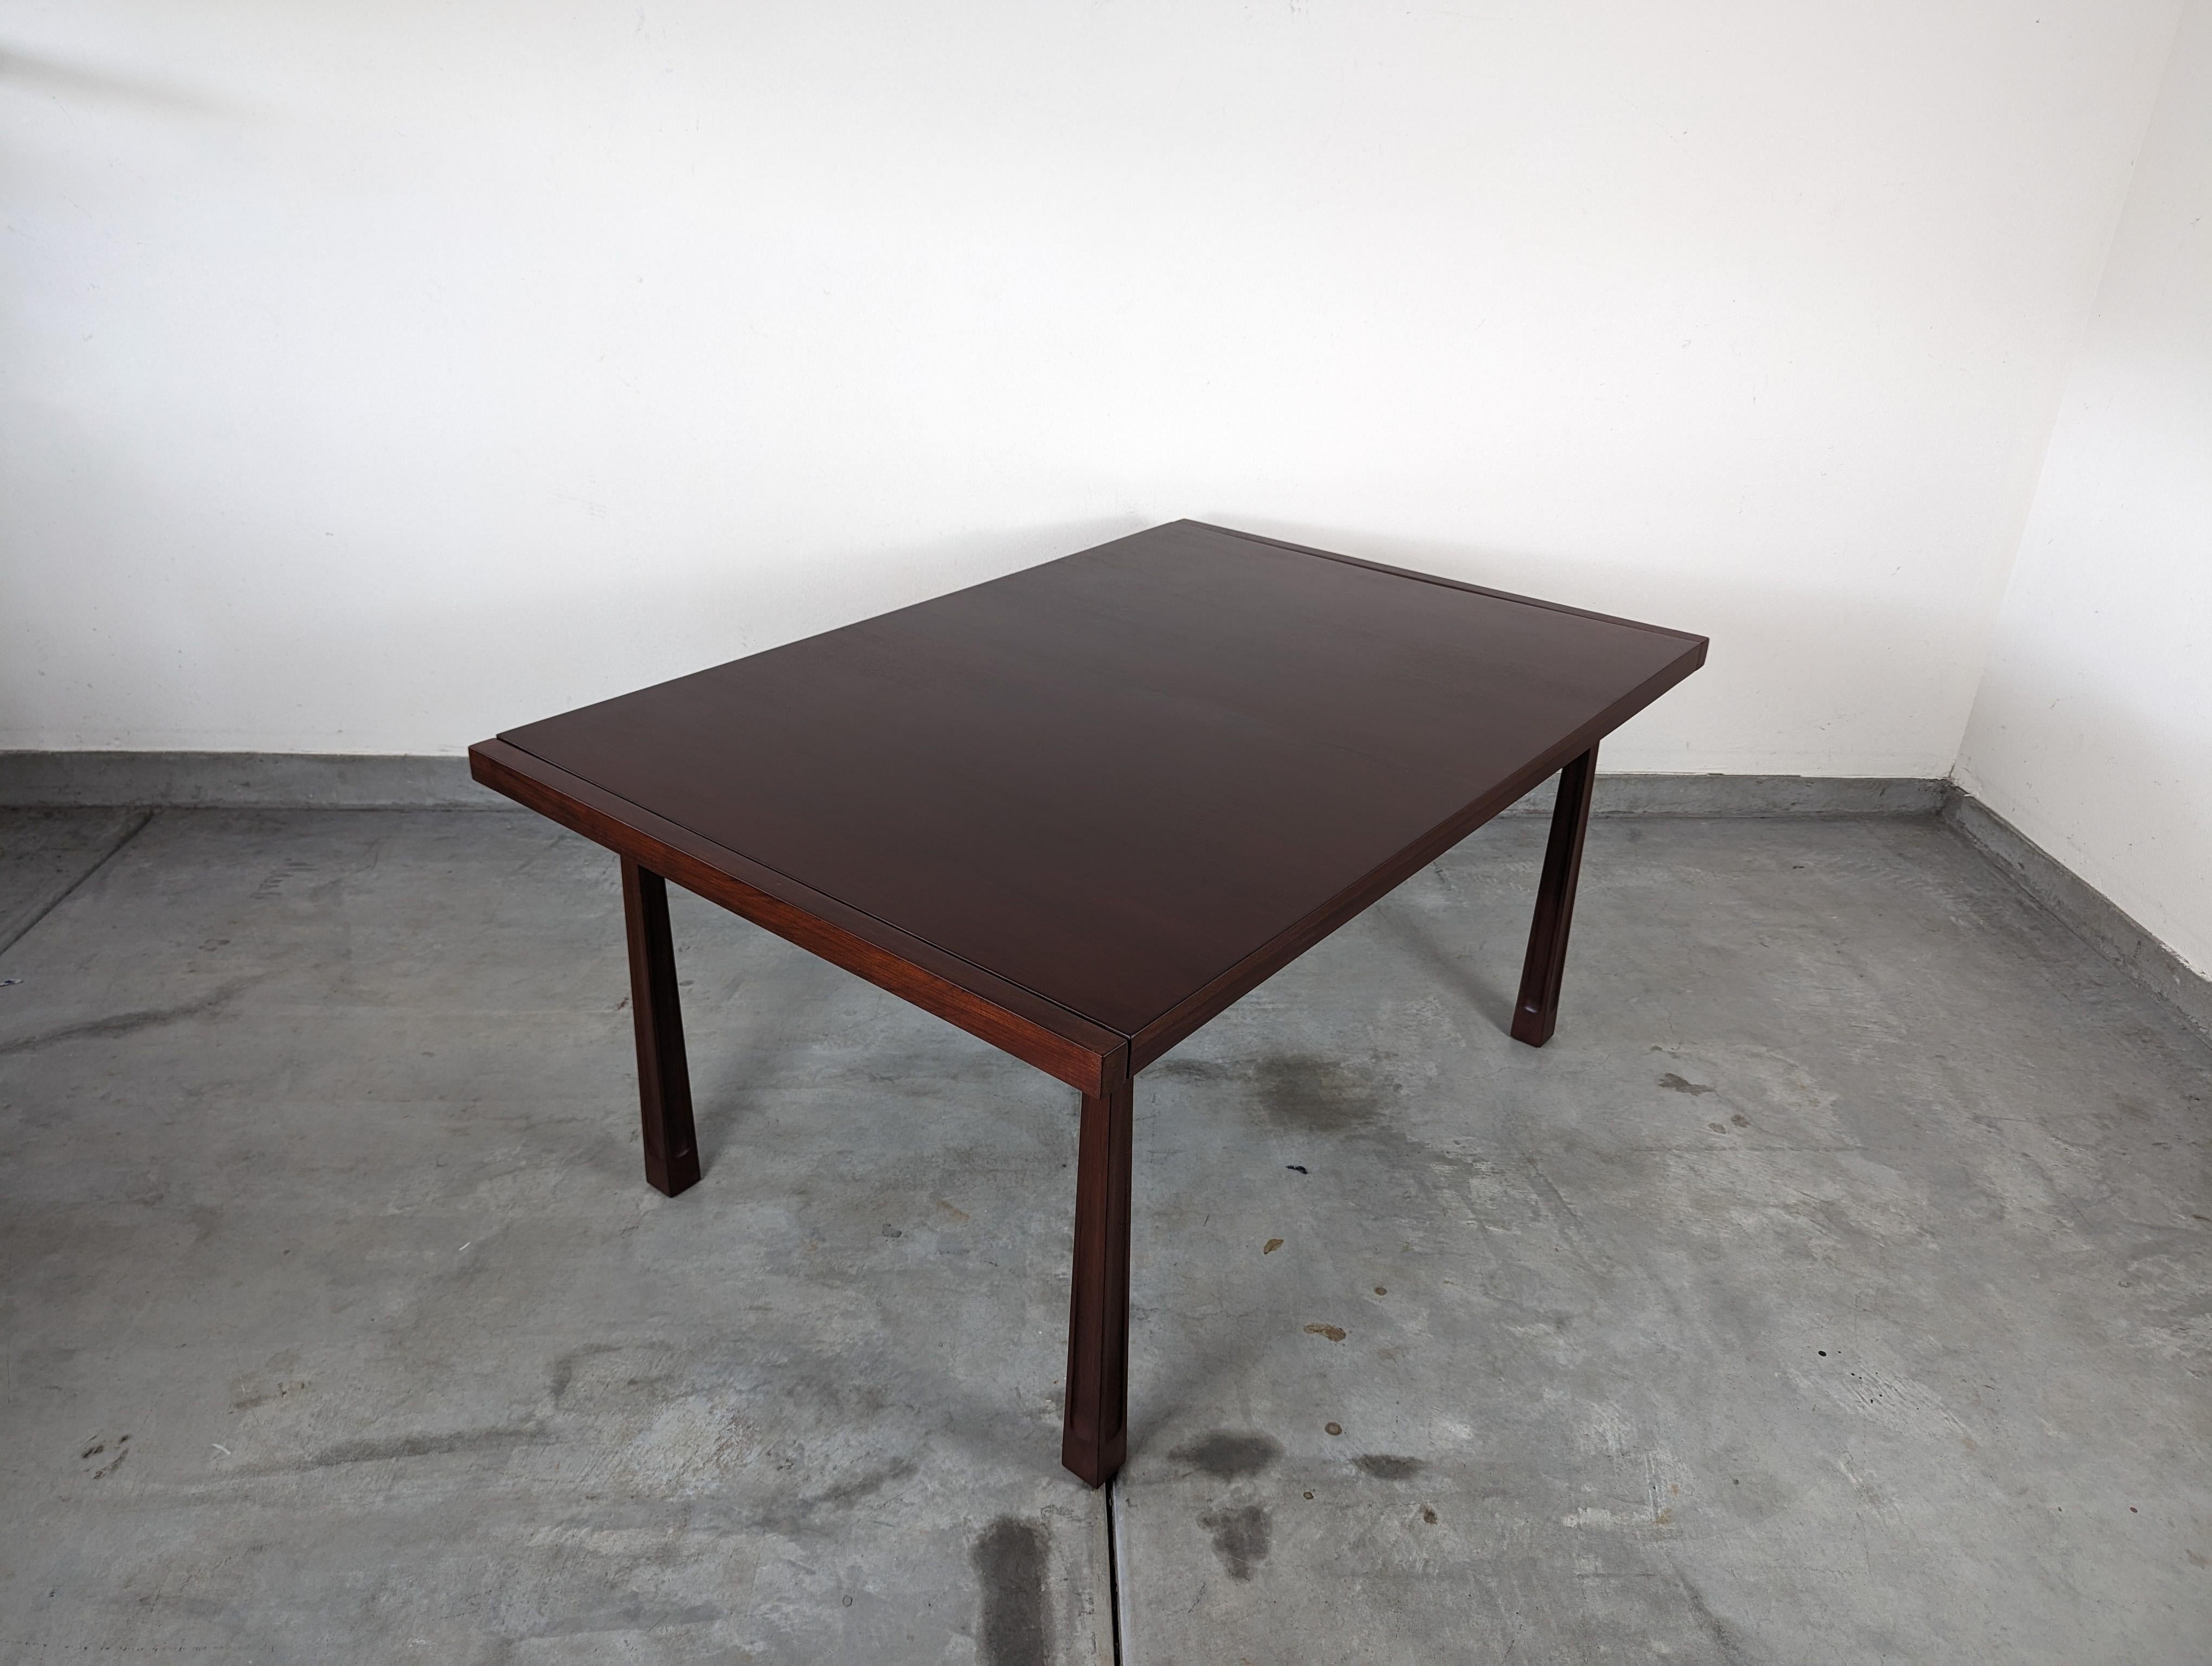 Mexican Mid-Century Dining Table by Edmond J. Spence for Industria Mueblera of Mexico